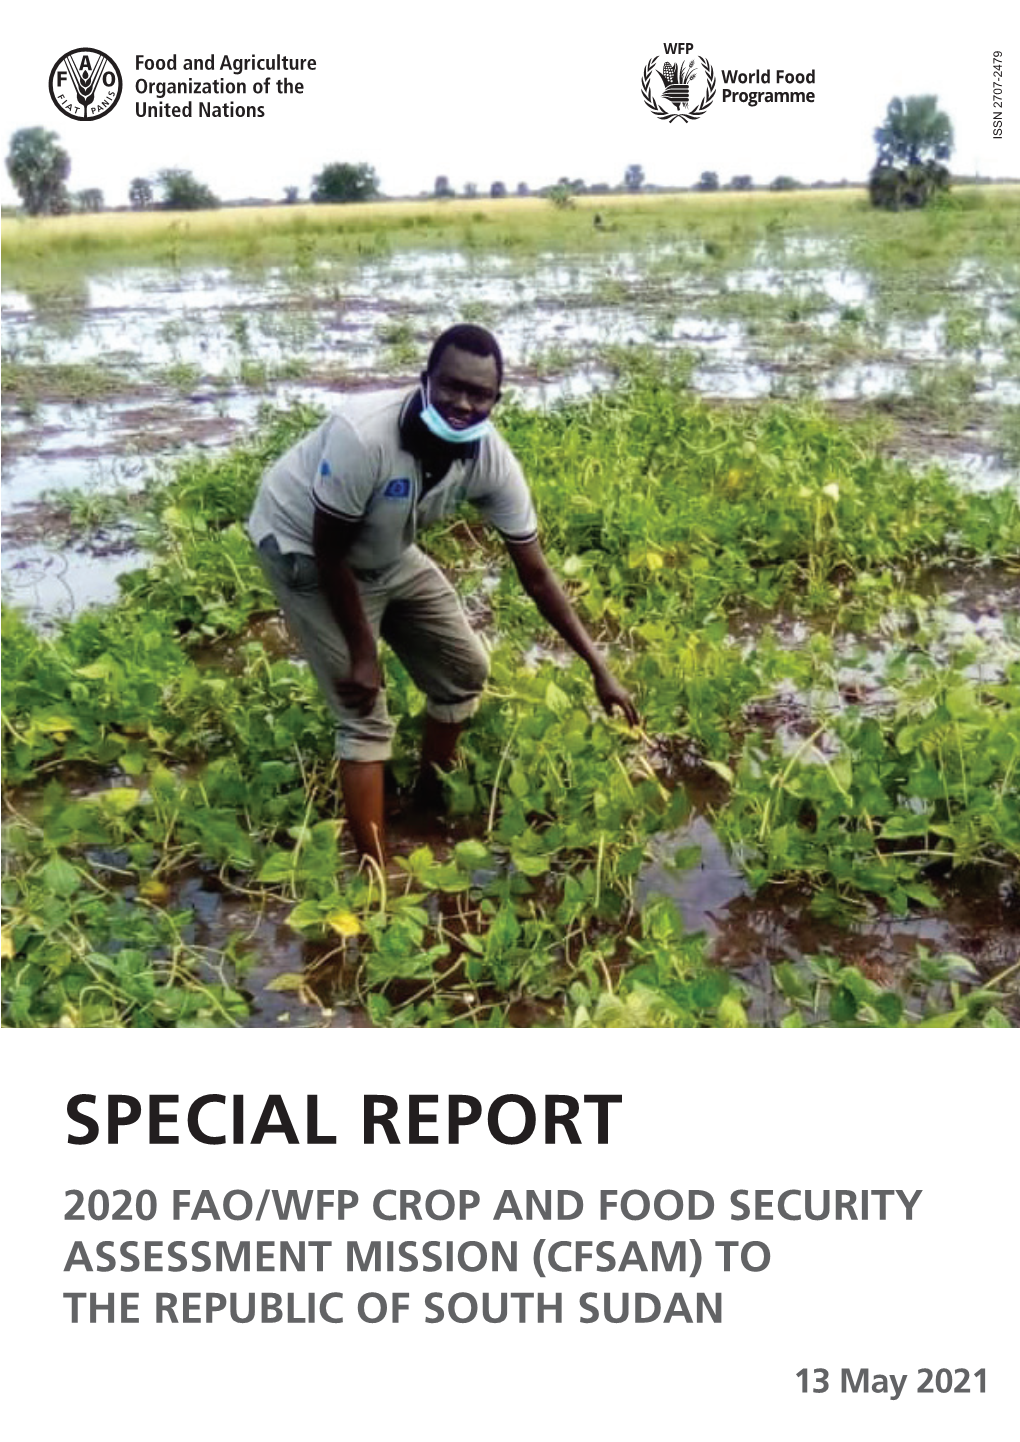 SPECIAL REPORT 2020 FAO/WFP CROP and FOOD SECURITY ASSESSMENT MISSION (CFSAM) to the REPUBLIC of SOUTH SUDAN 13 May 2021